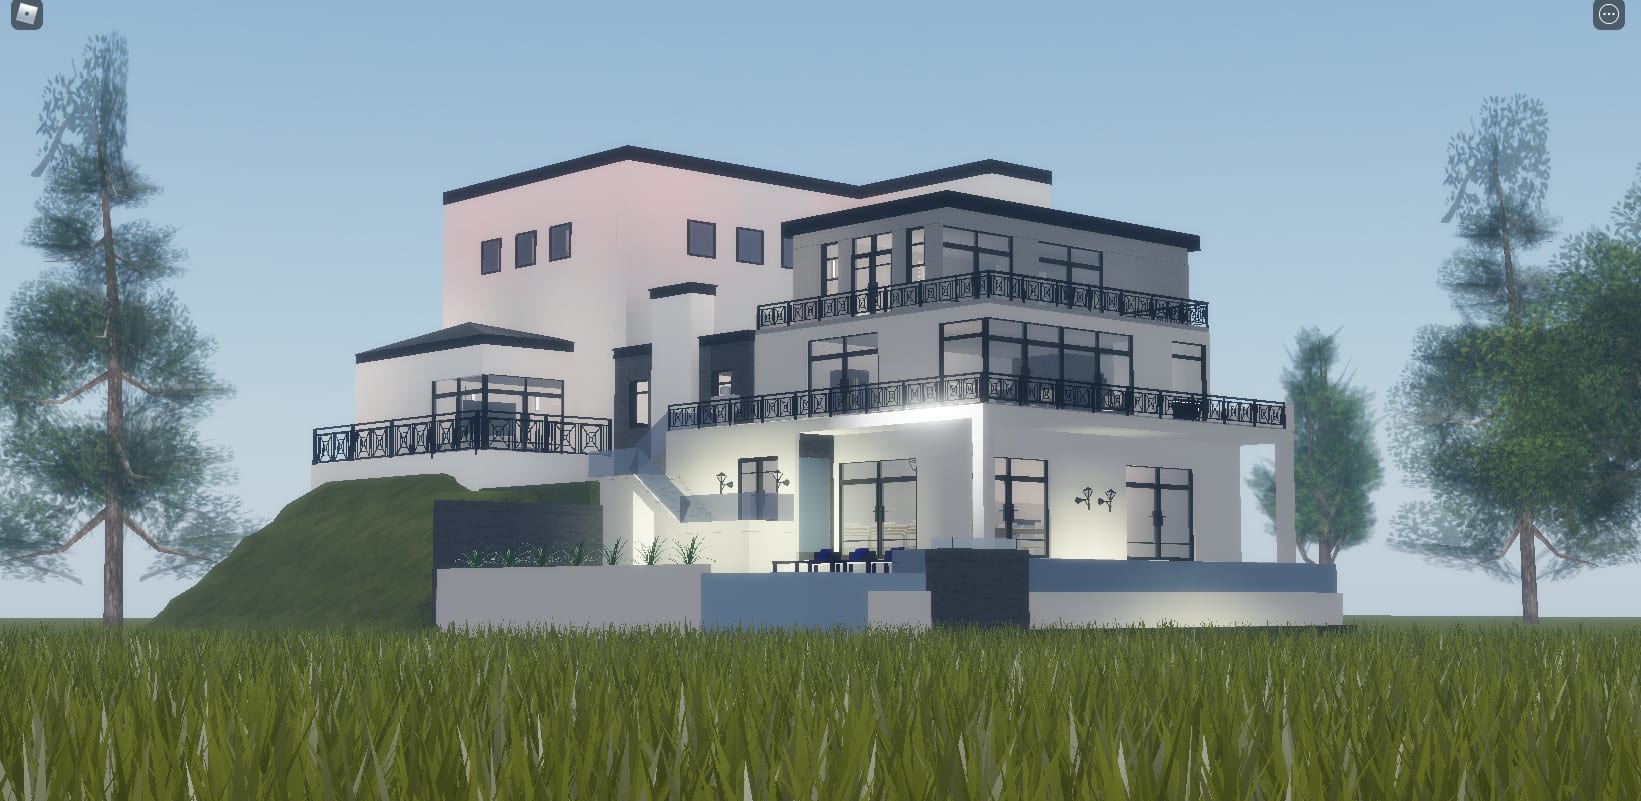 Just a build I made in Roblox studio : r/roblox